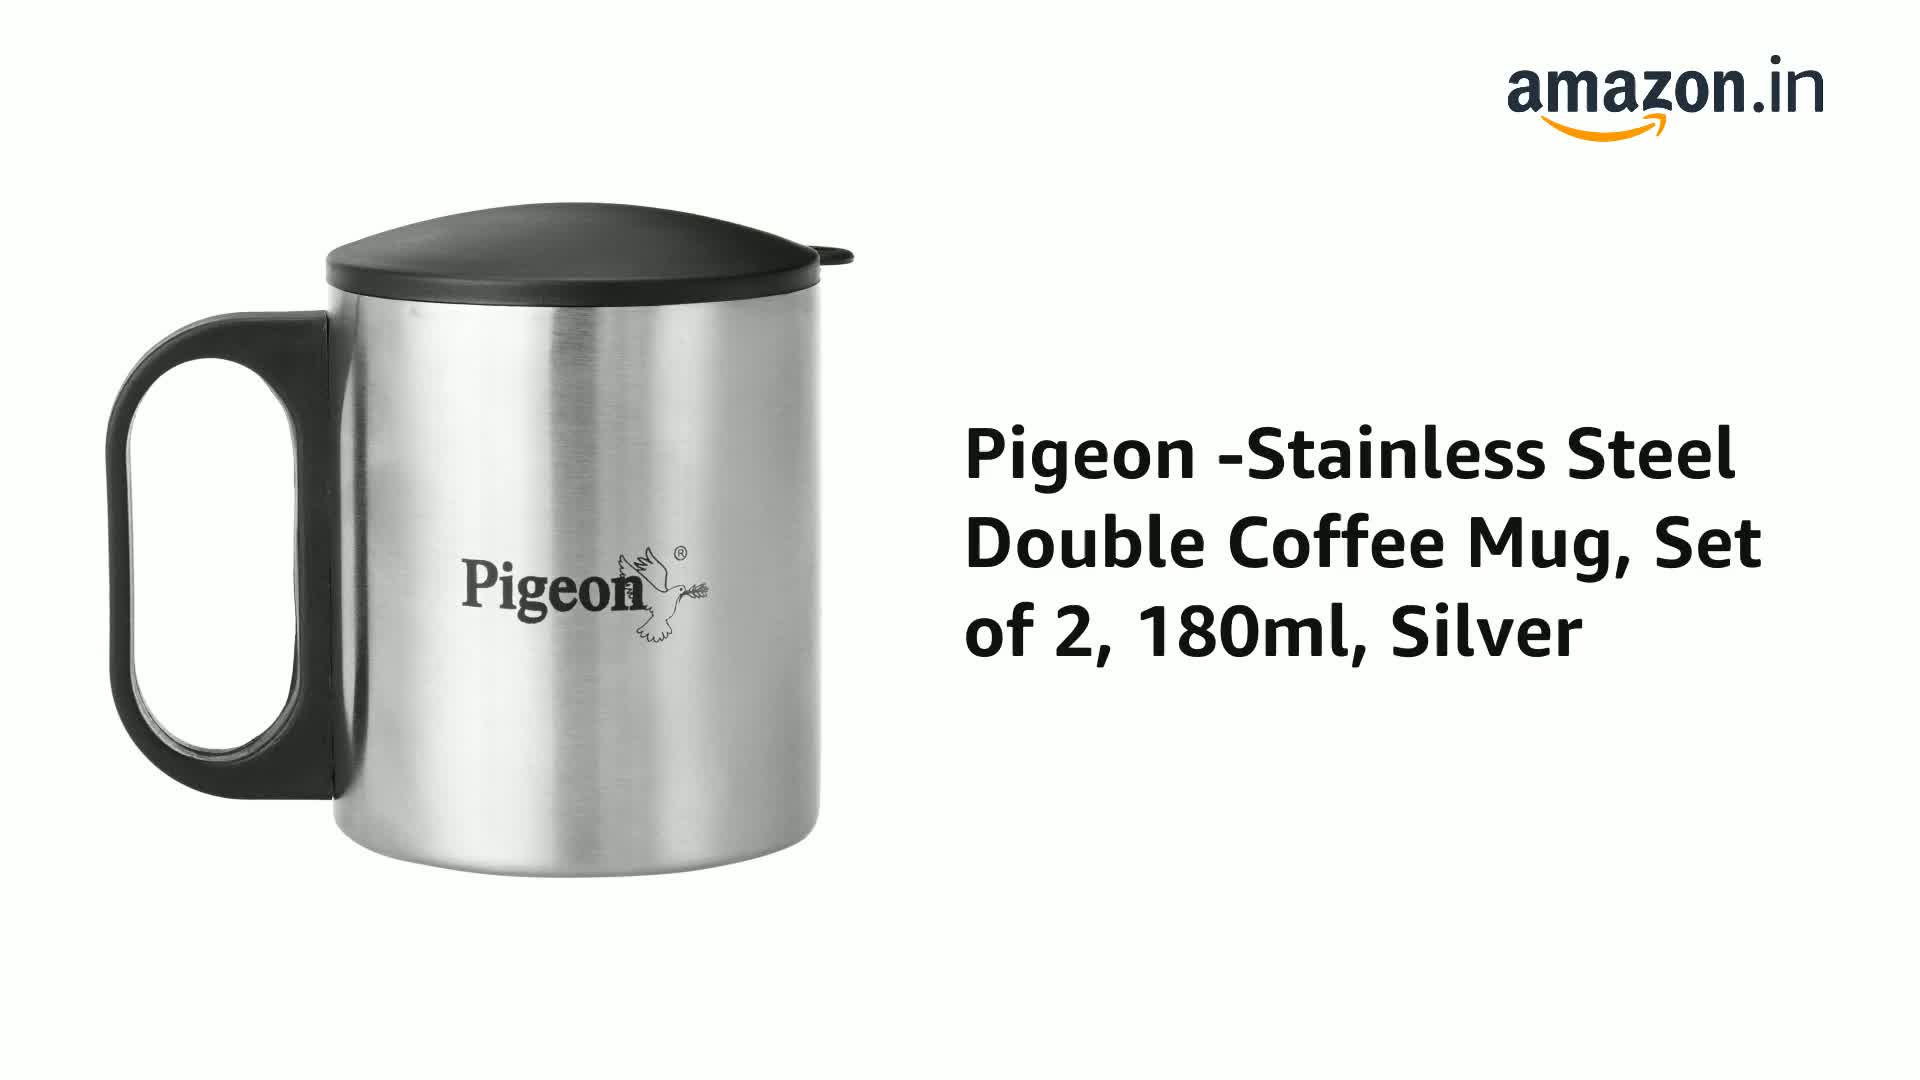 Pigeon-Stainless Steel Double Coffee Mug Set of 2 180ml Silver, 2 image